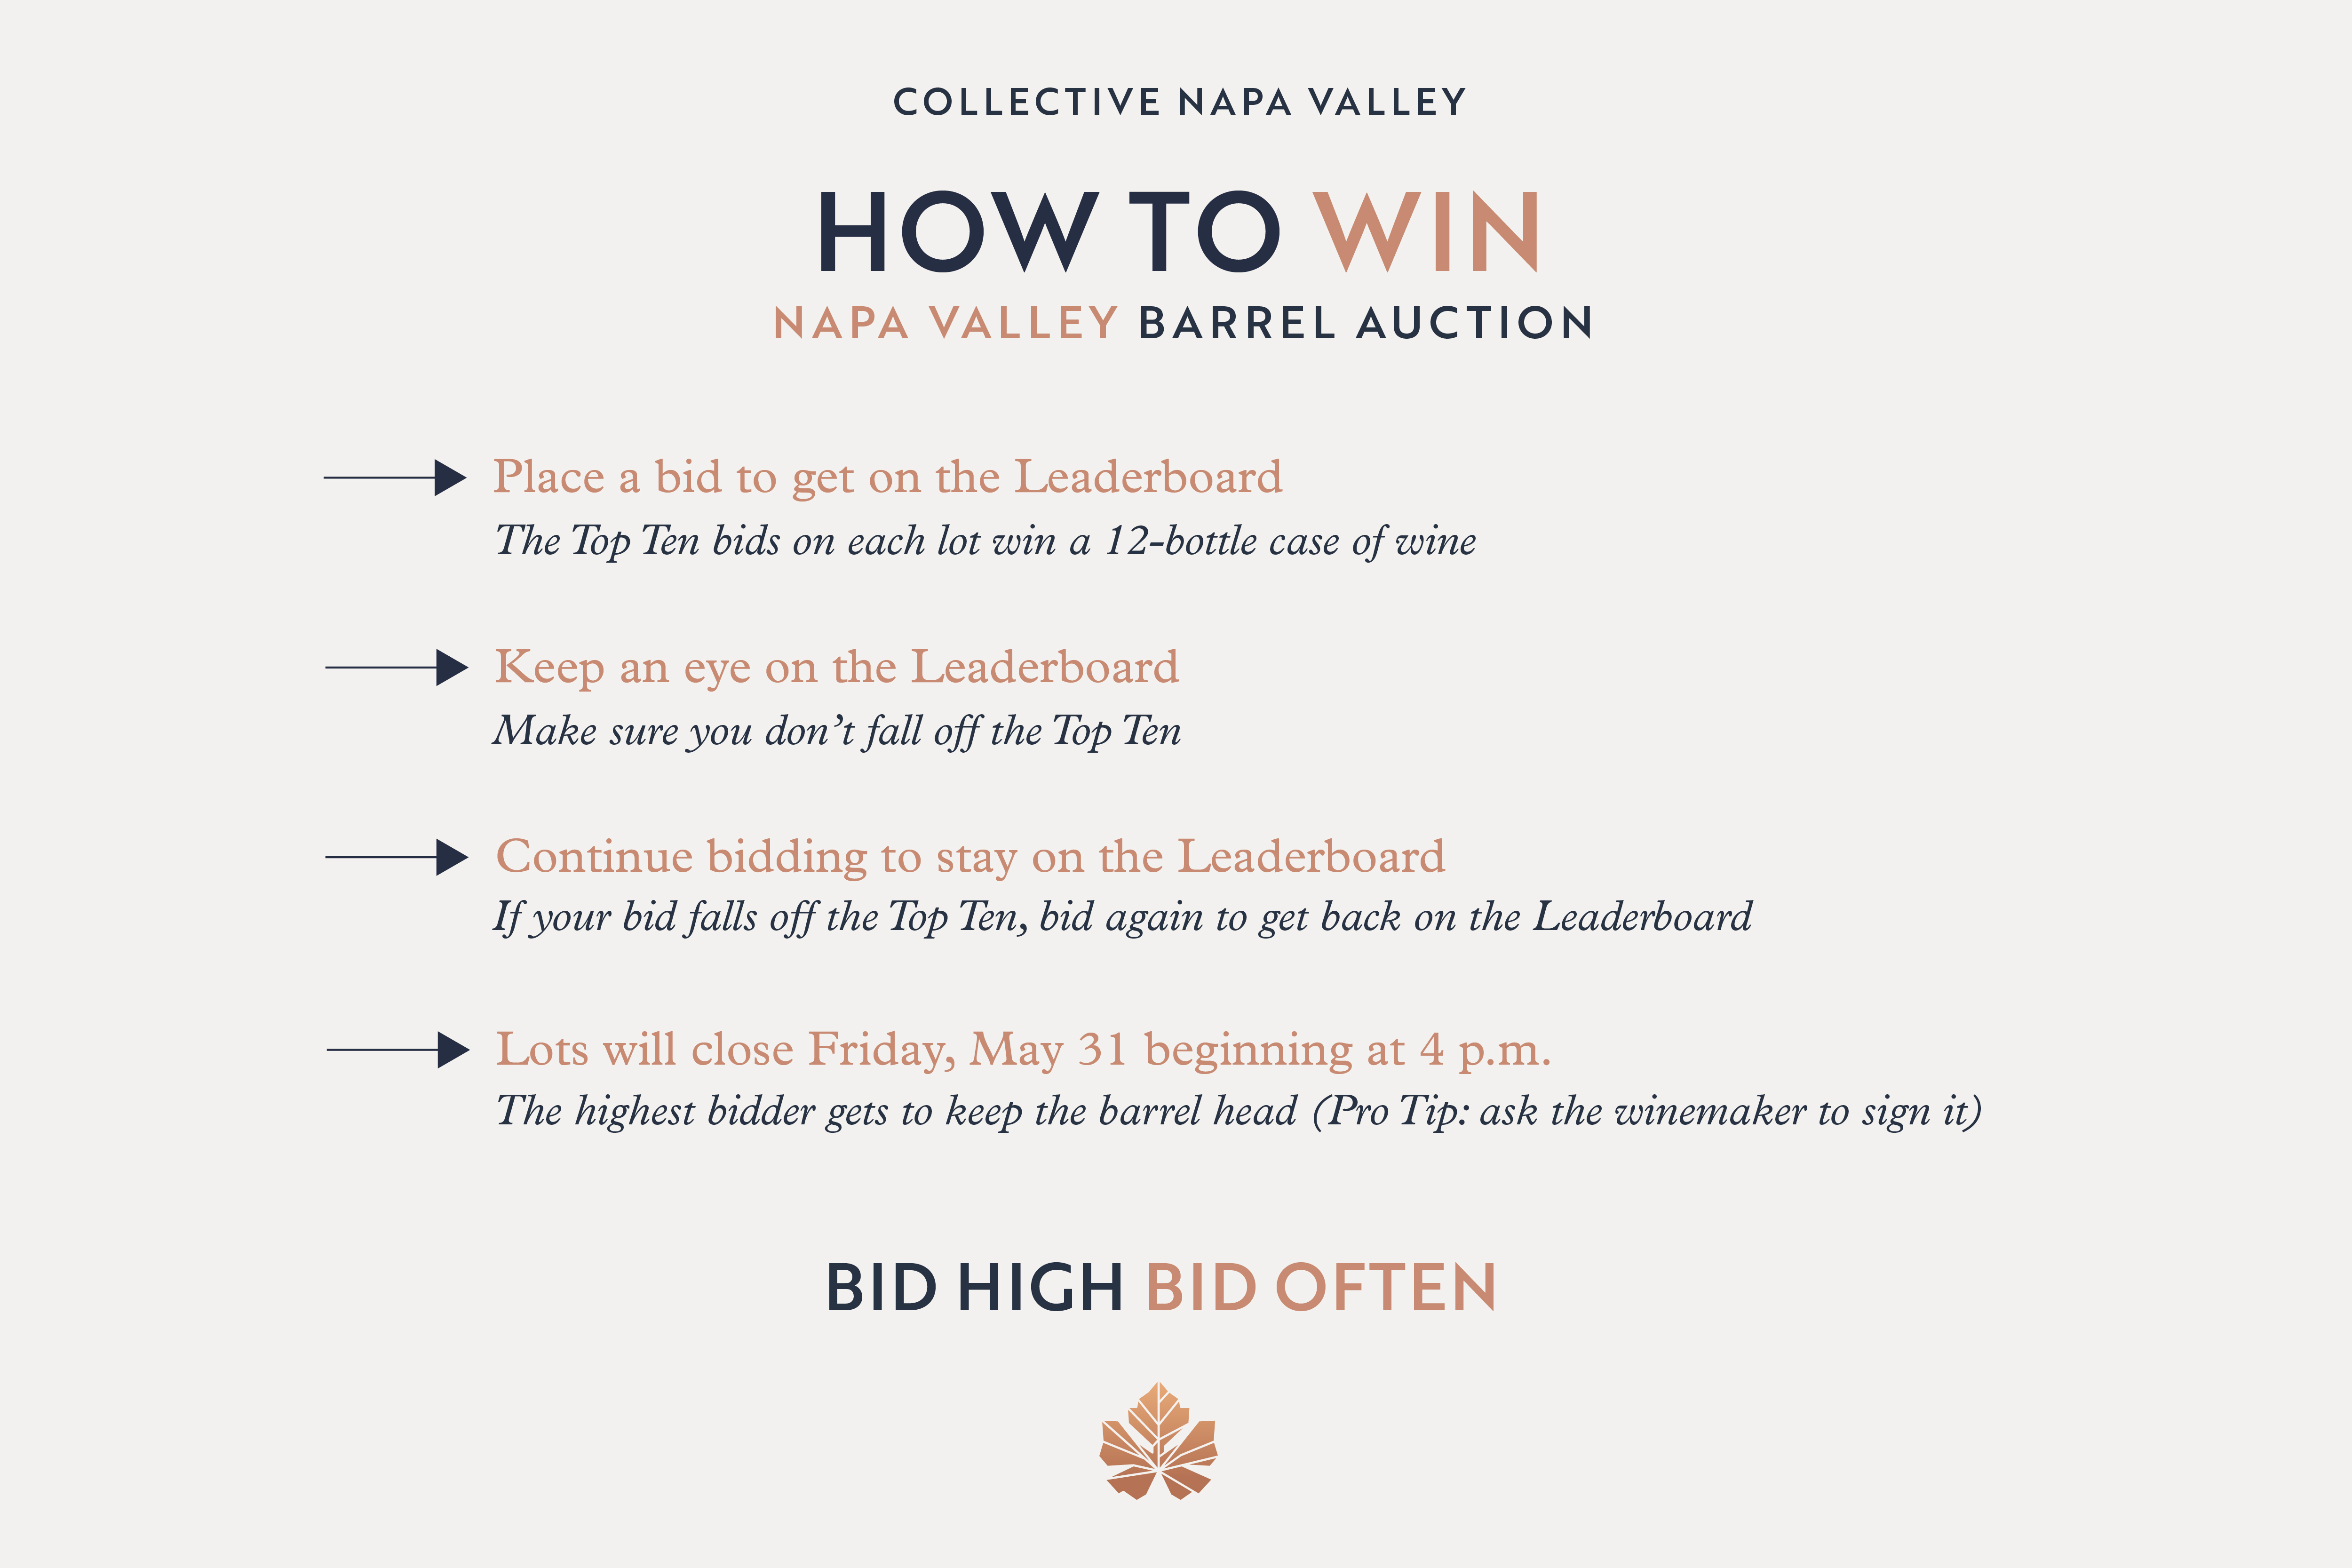 how to bid at the collective napa valley barrel auction